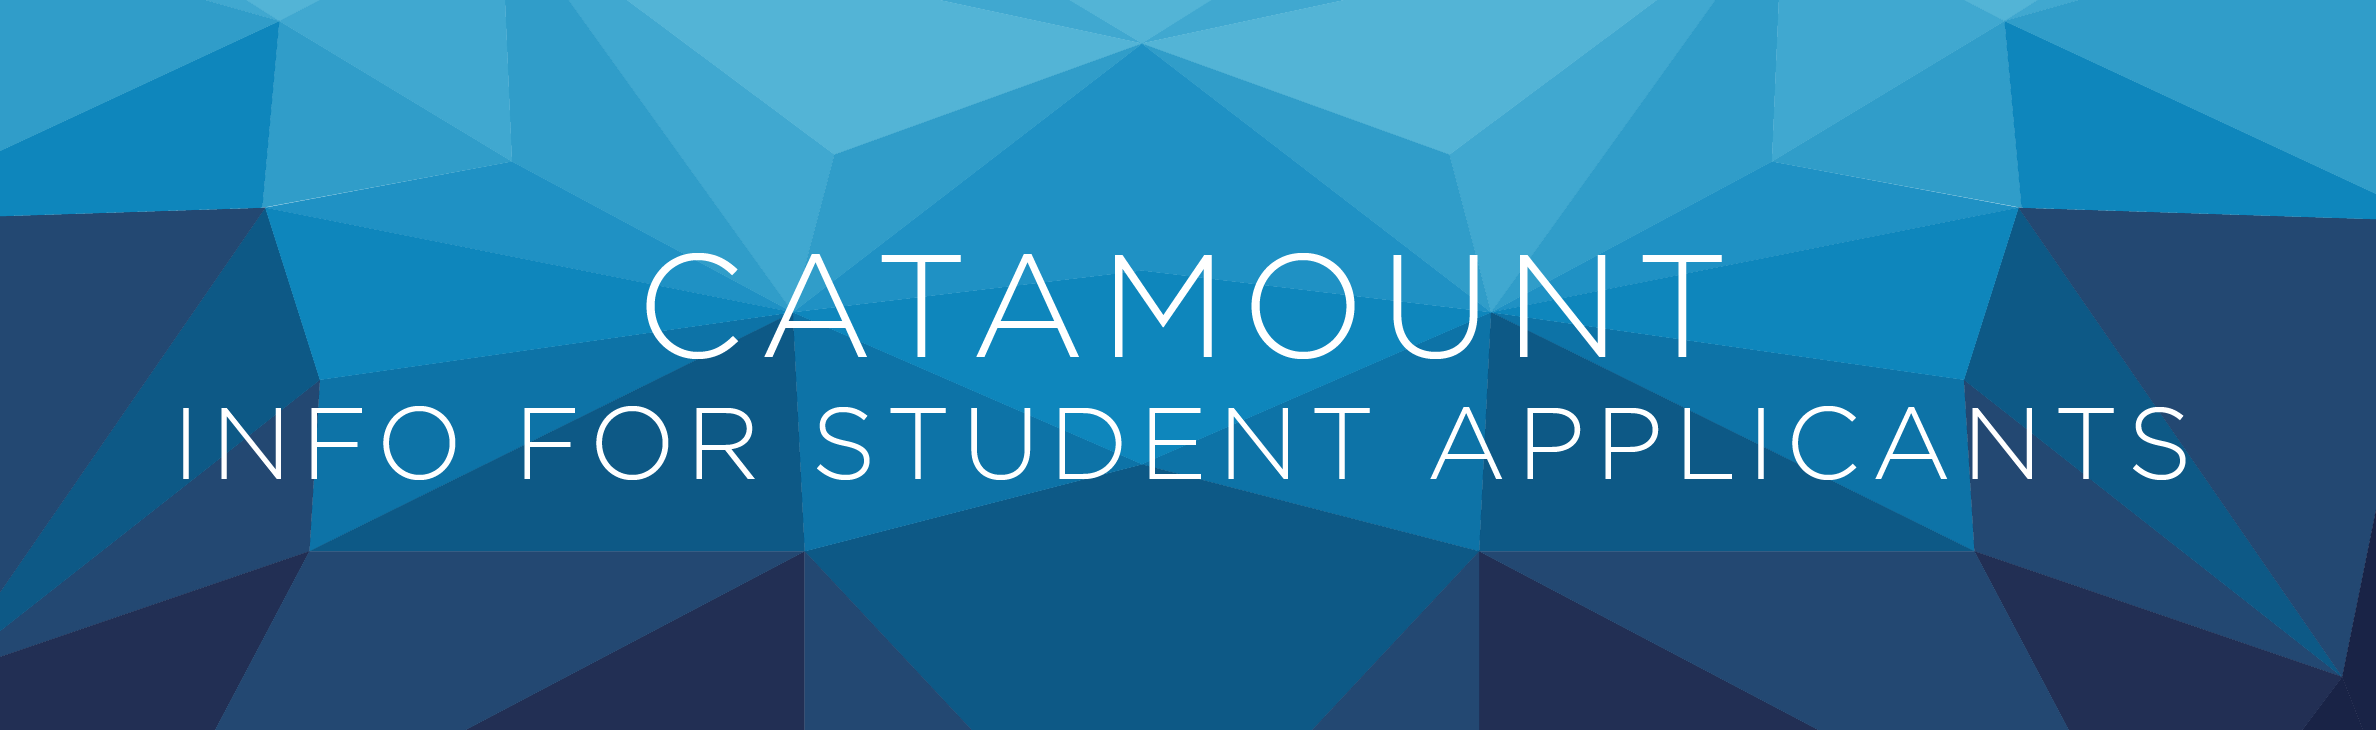 Top Banner: Catamount: Info for Student Applicants